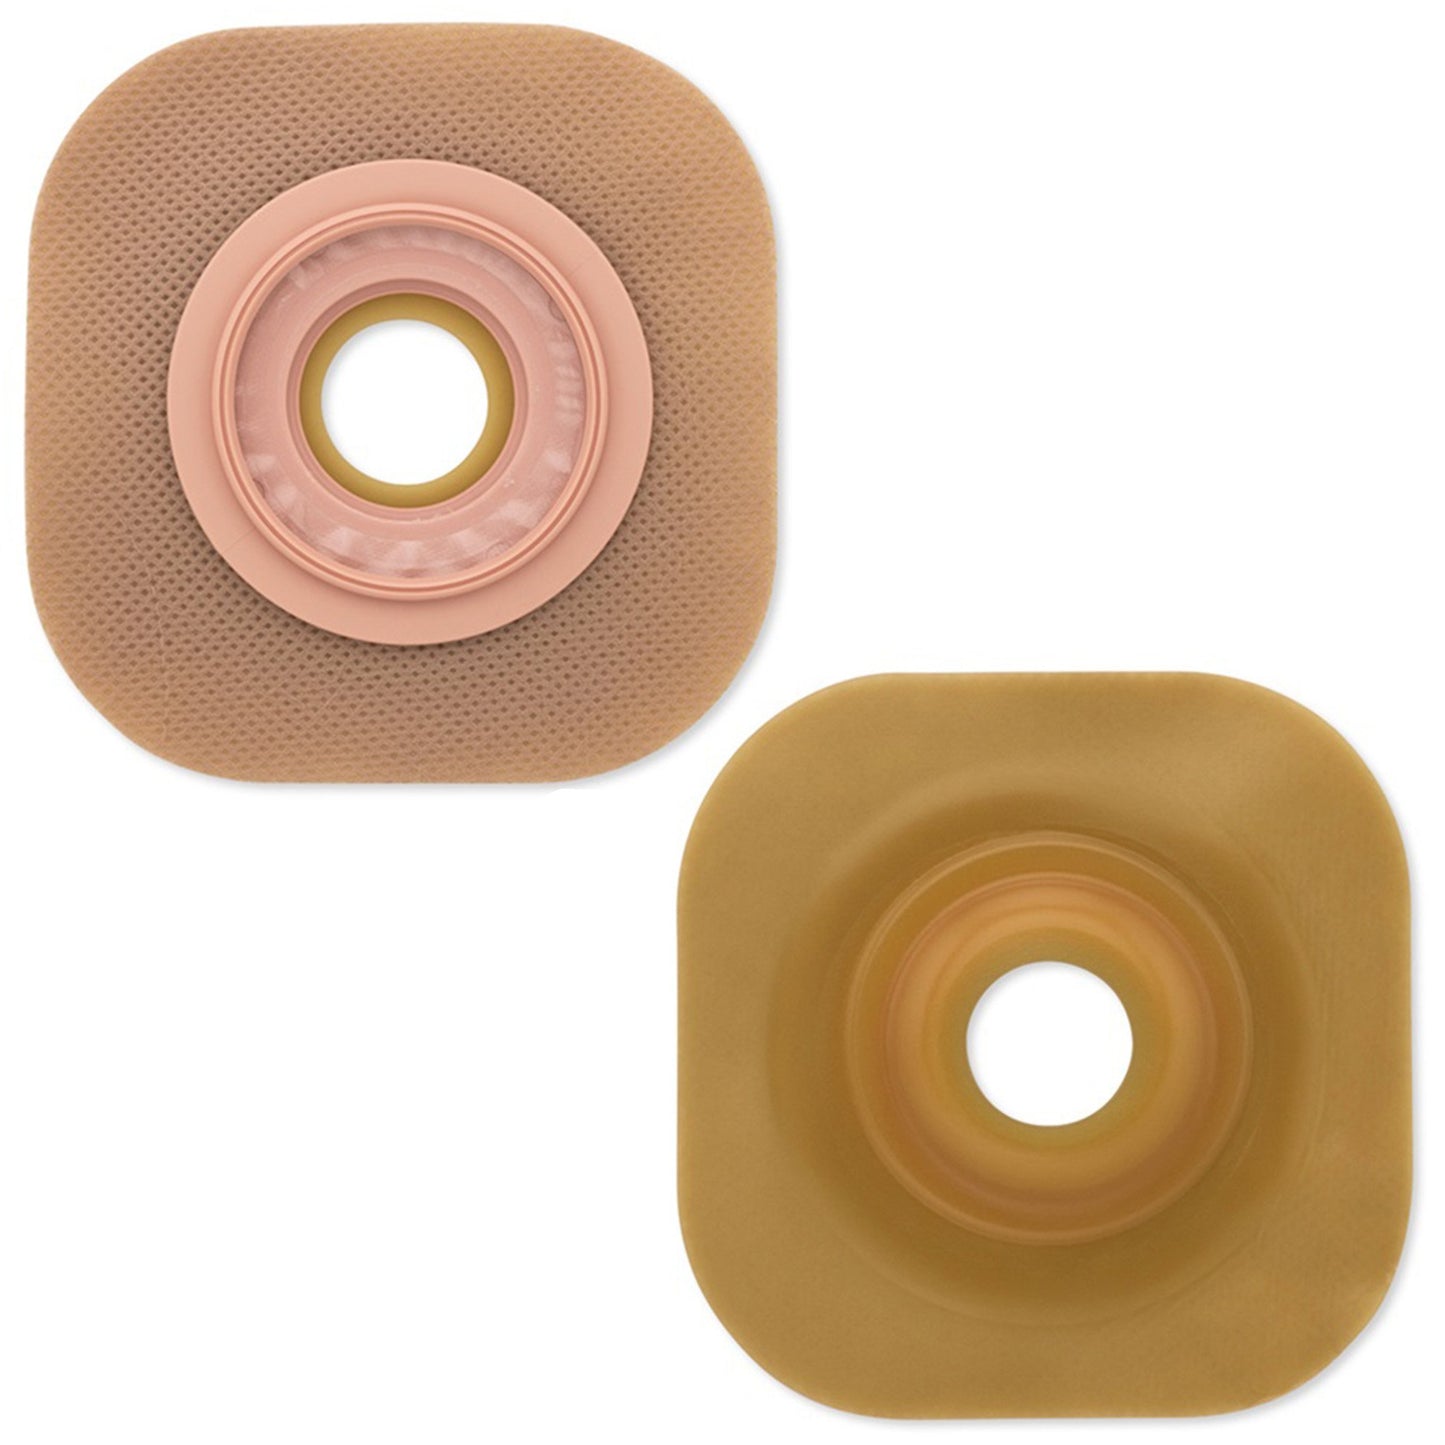 FlexWear™ Colostomy Barrier With 1 Inch Stoma Opening, 5 ct